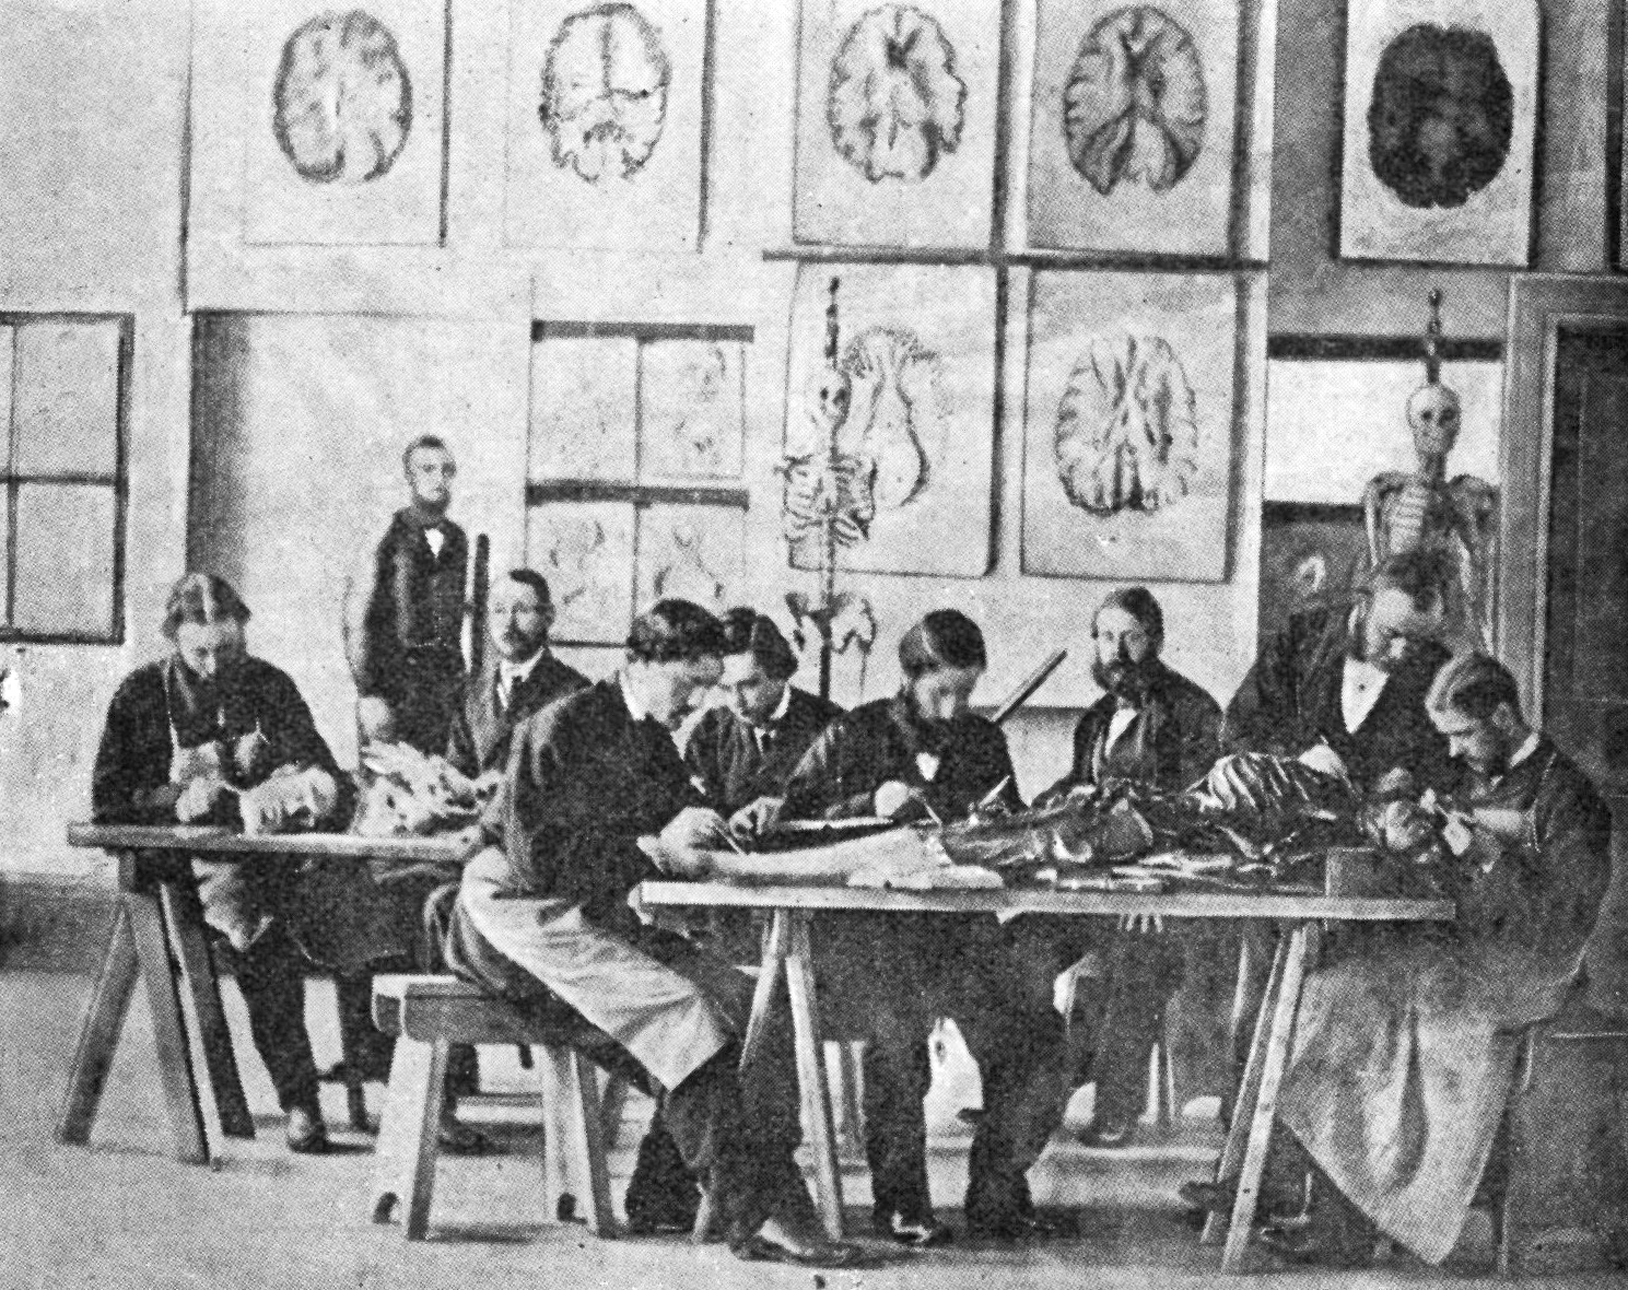 An early dissecting class, Prof Halford is second from right